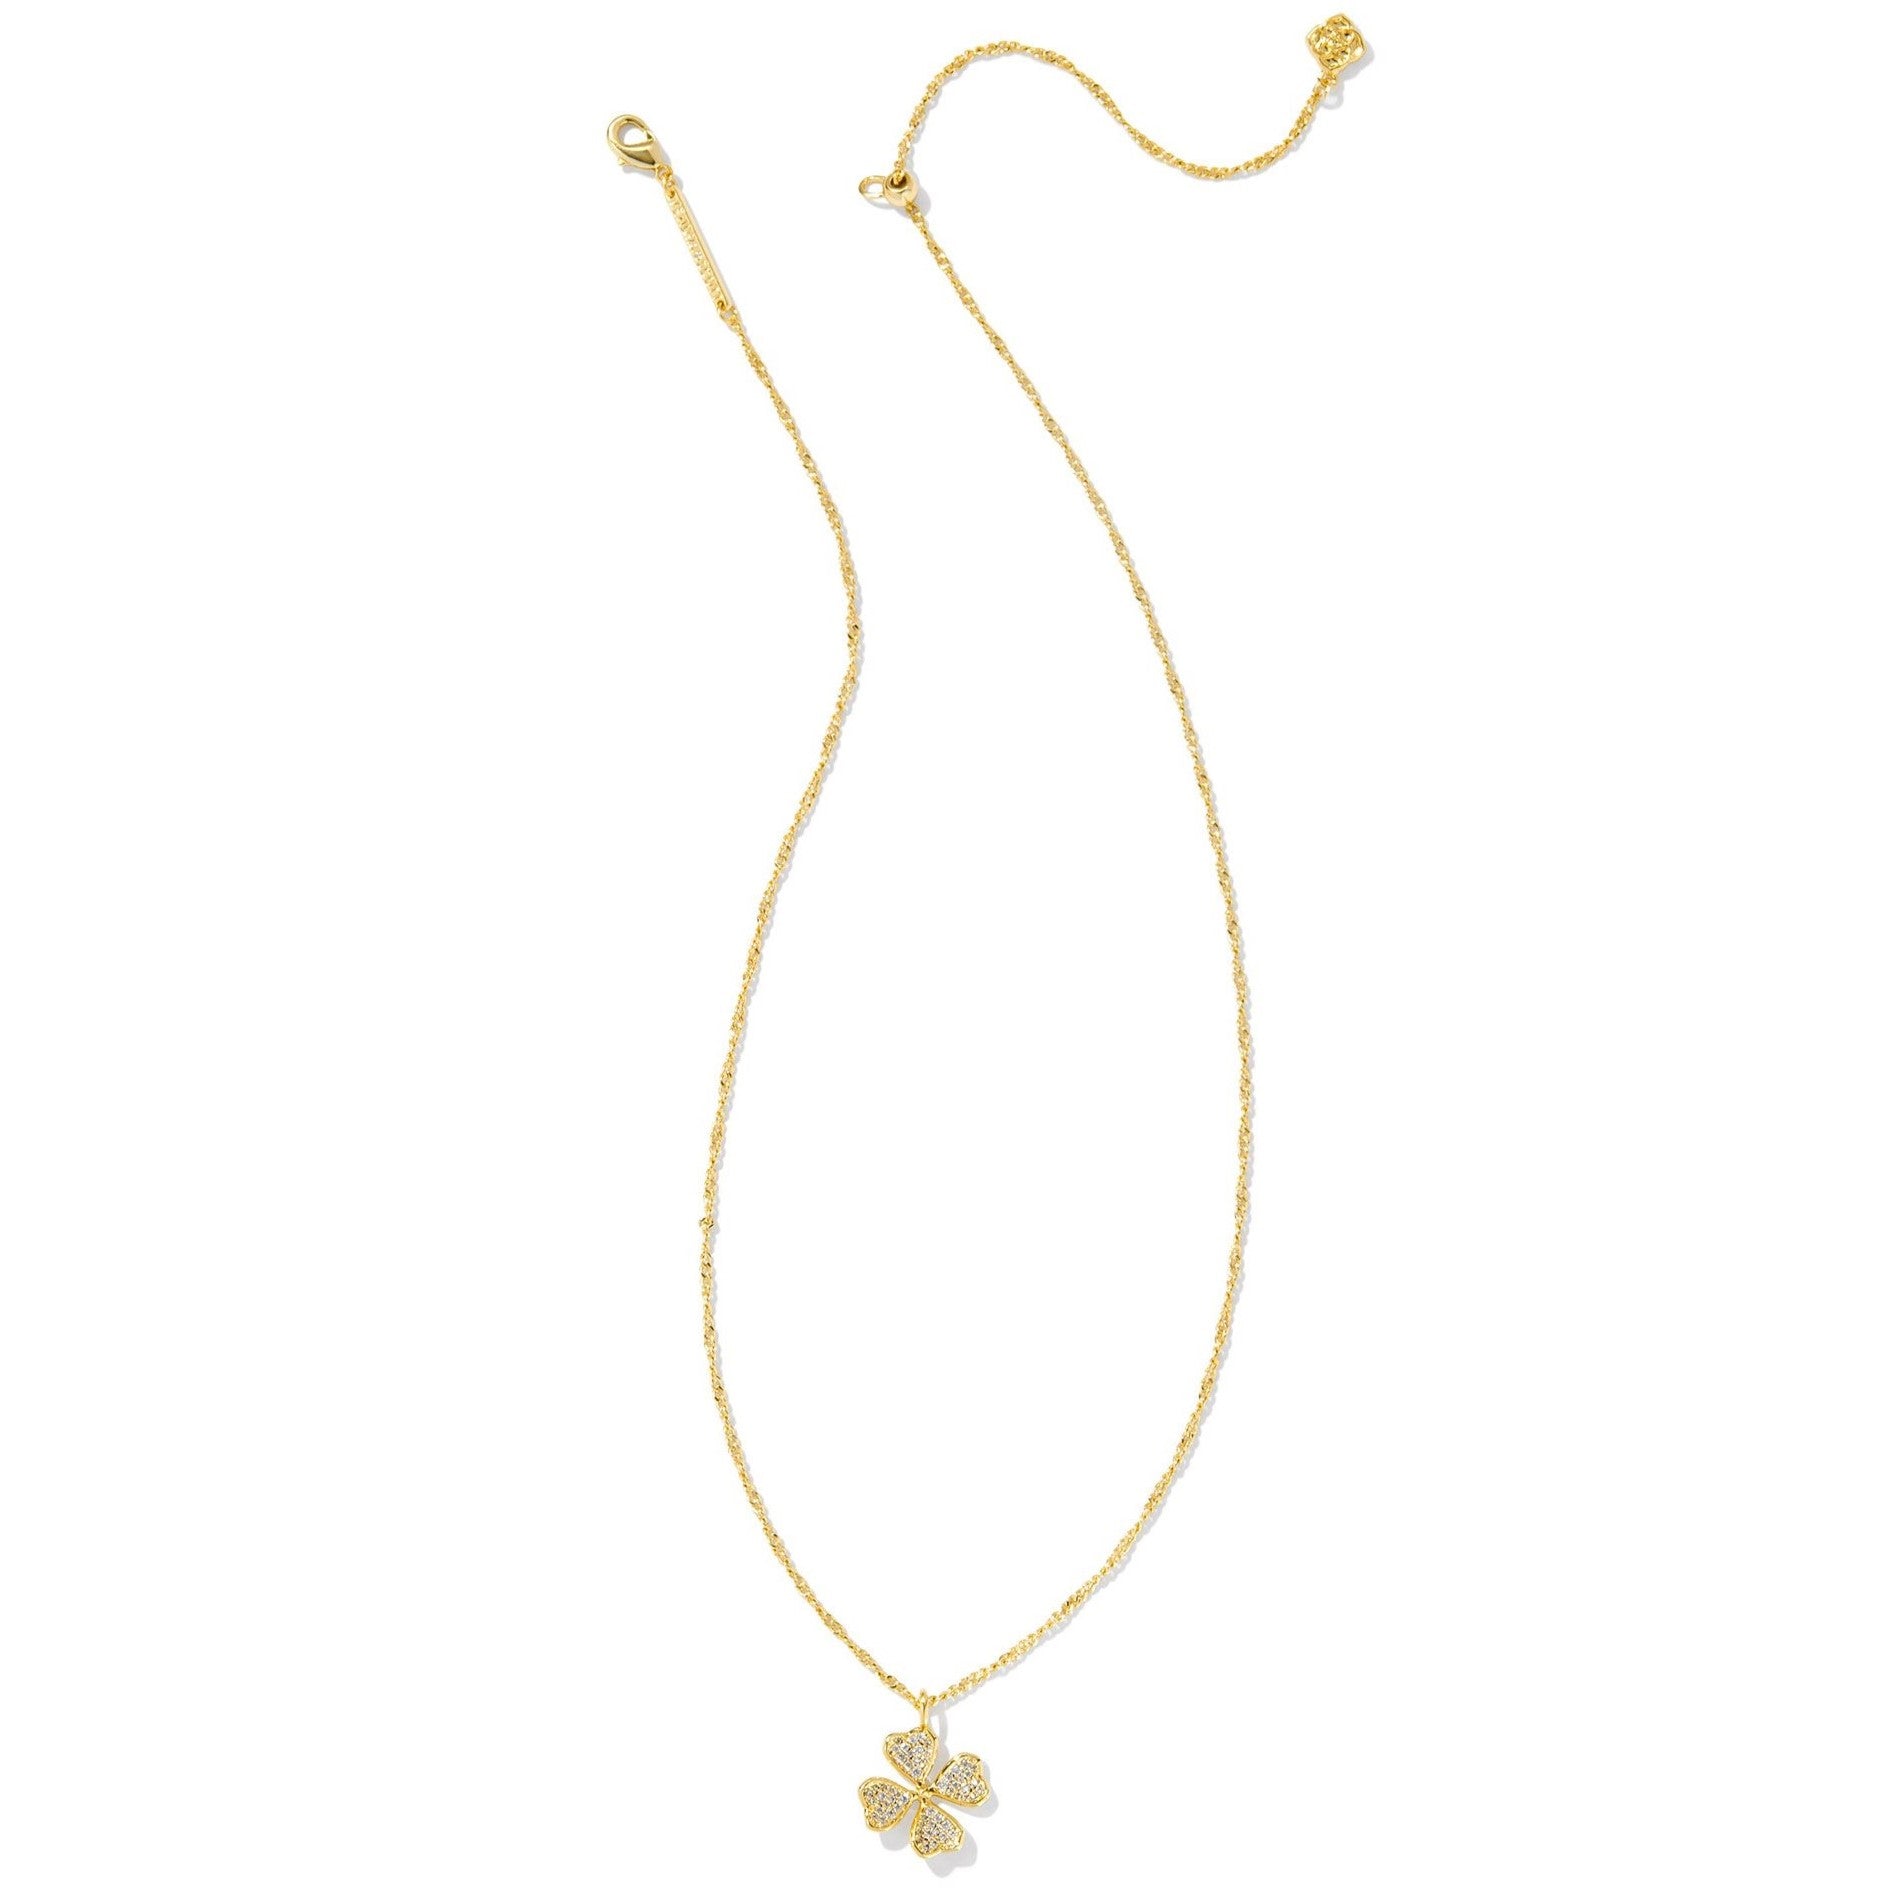 Kendra Scott | Clover Crystal Short Pendant Necklace in Gold - Giddy Up Glamour Boutique